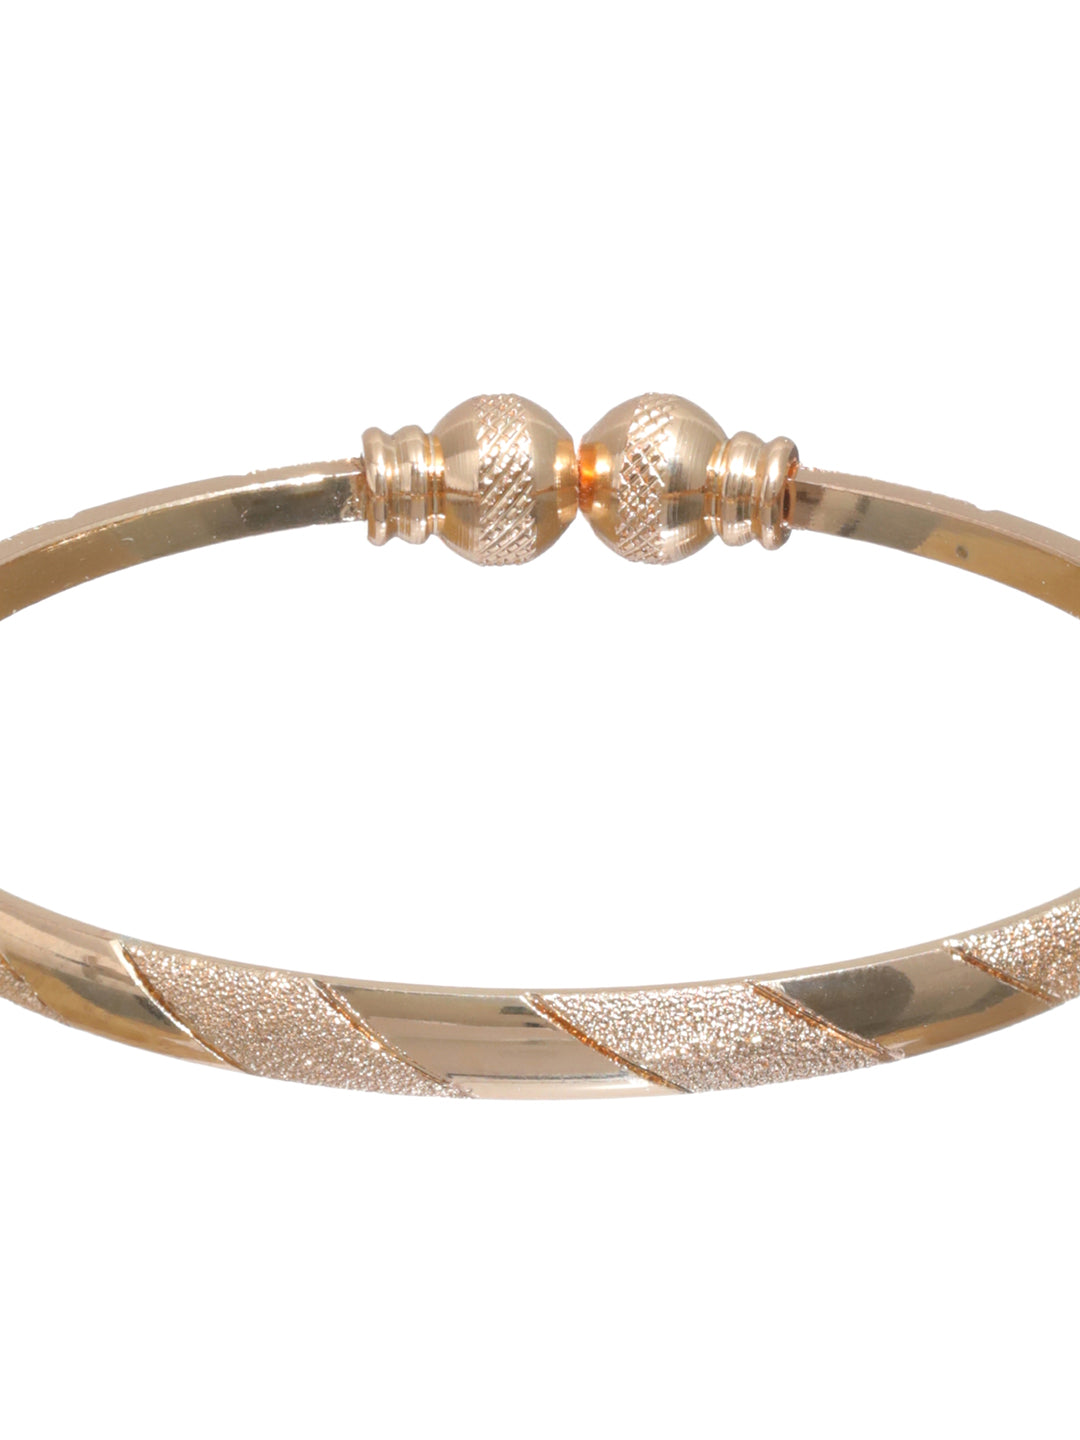 FINE JEWELRY Made in Italy 10K Gold Over Silver Bangle Bracelet | Hamilton  Place